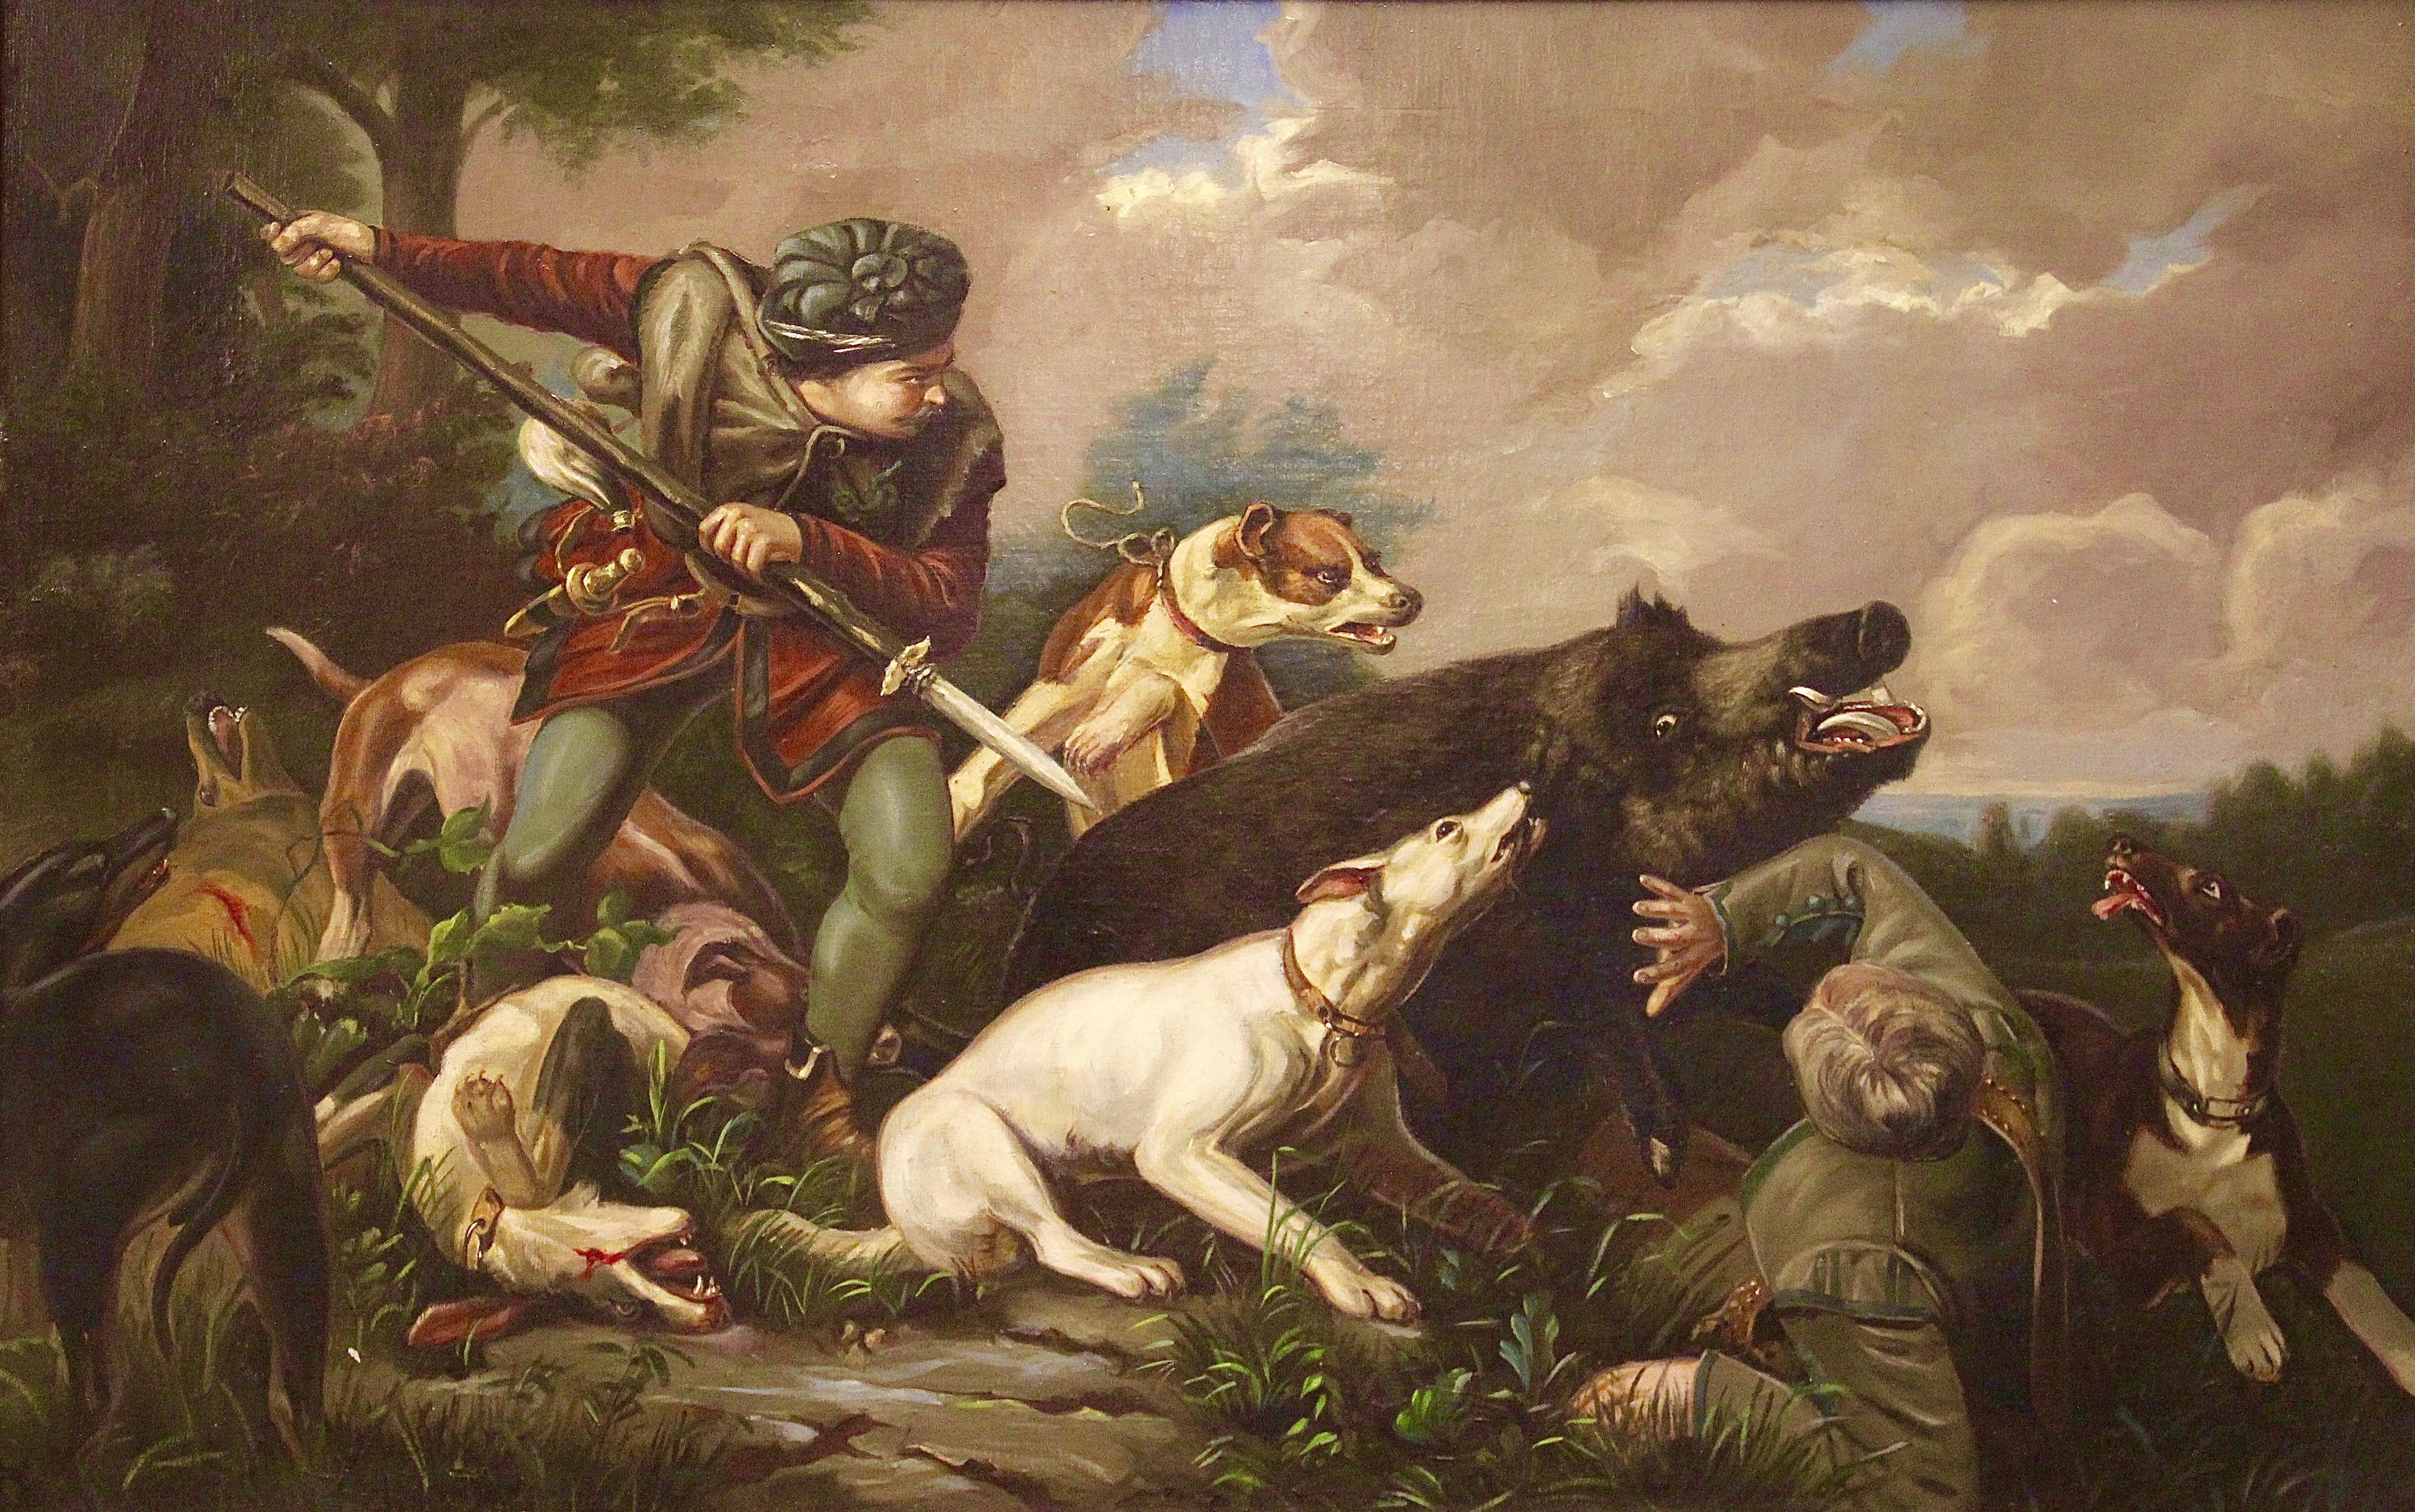 Unknown Figurative Painting - Large, antique oil painting. Oil on canvas. 19th century. Hunting scene. 